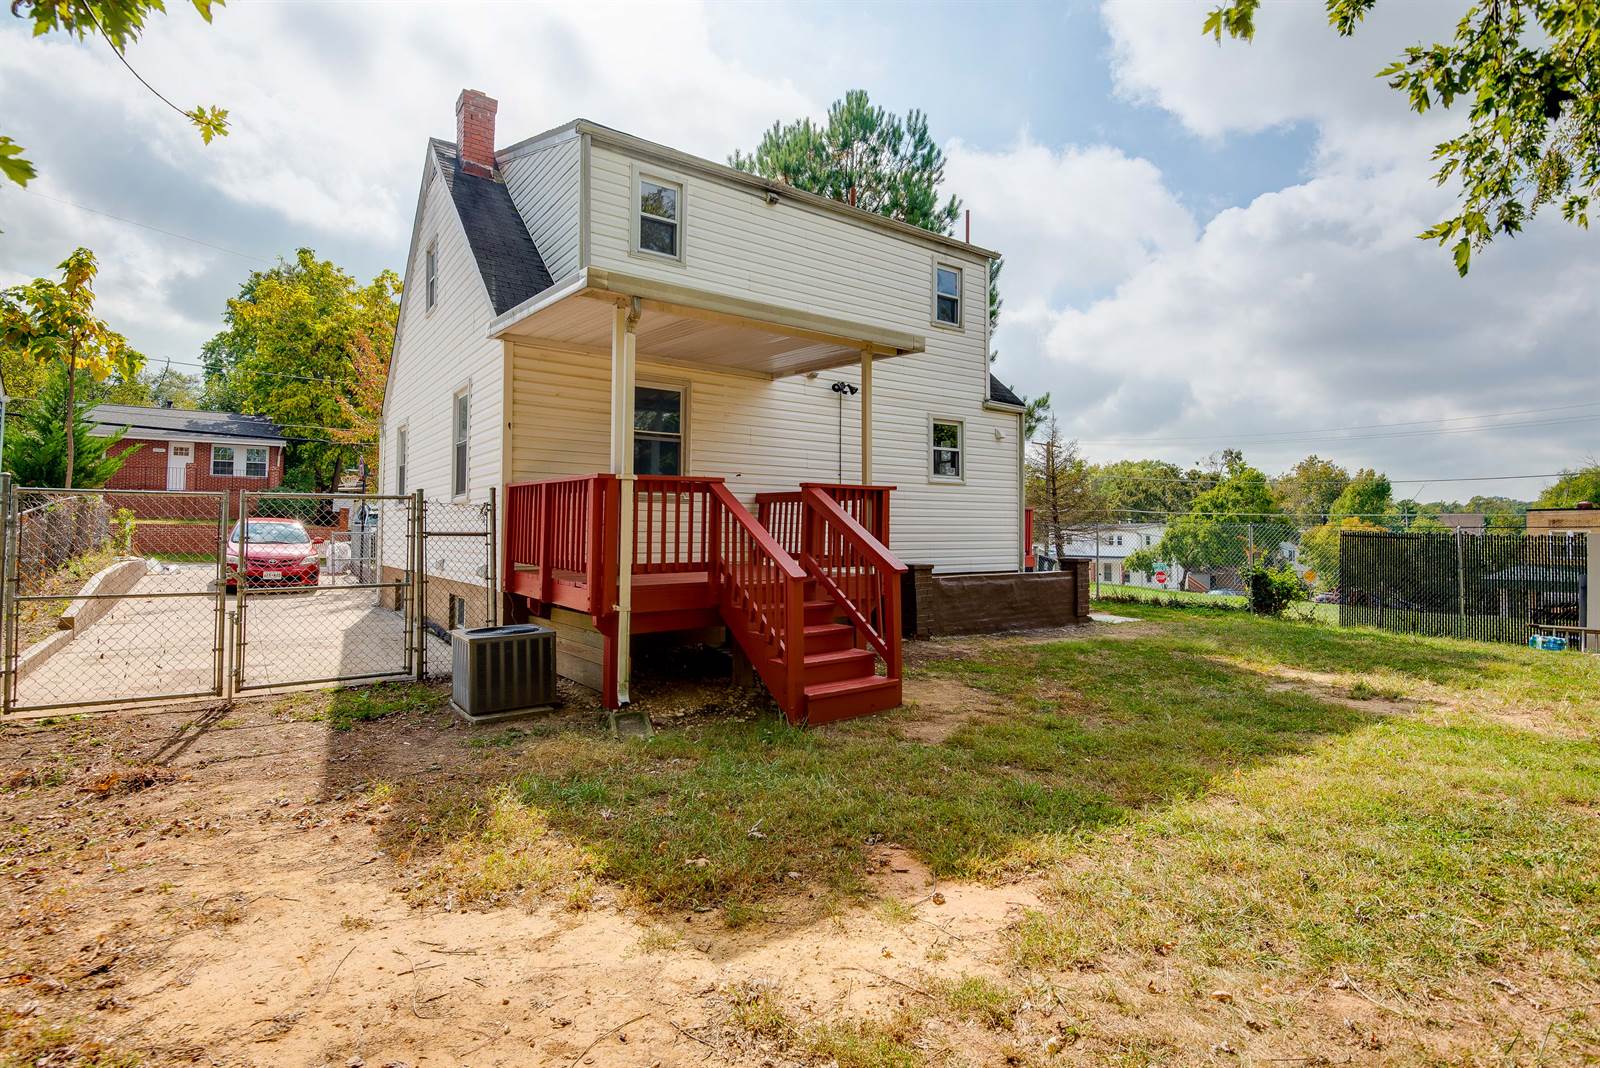 5702 Eagle St, Capitol Heights, MD 20743